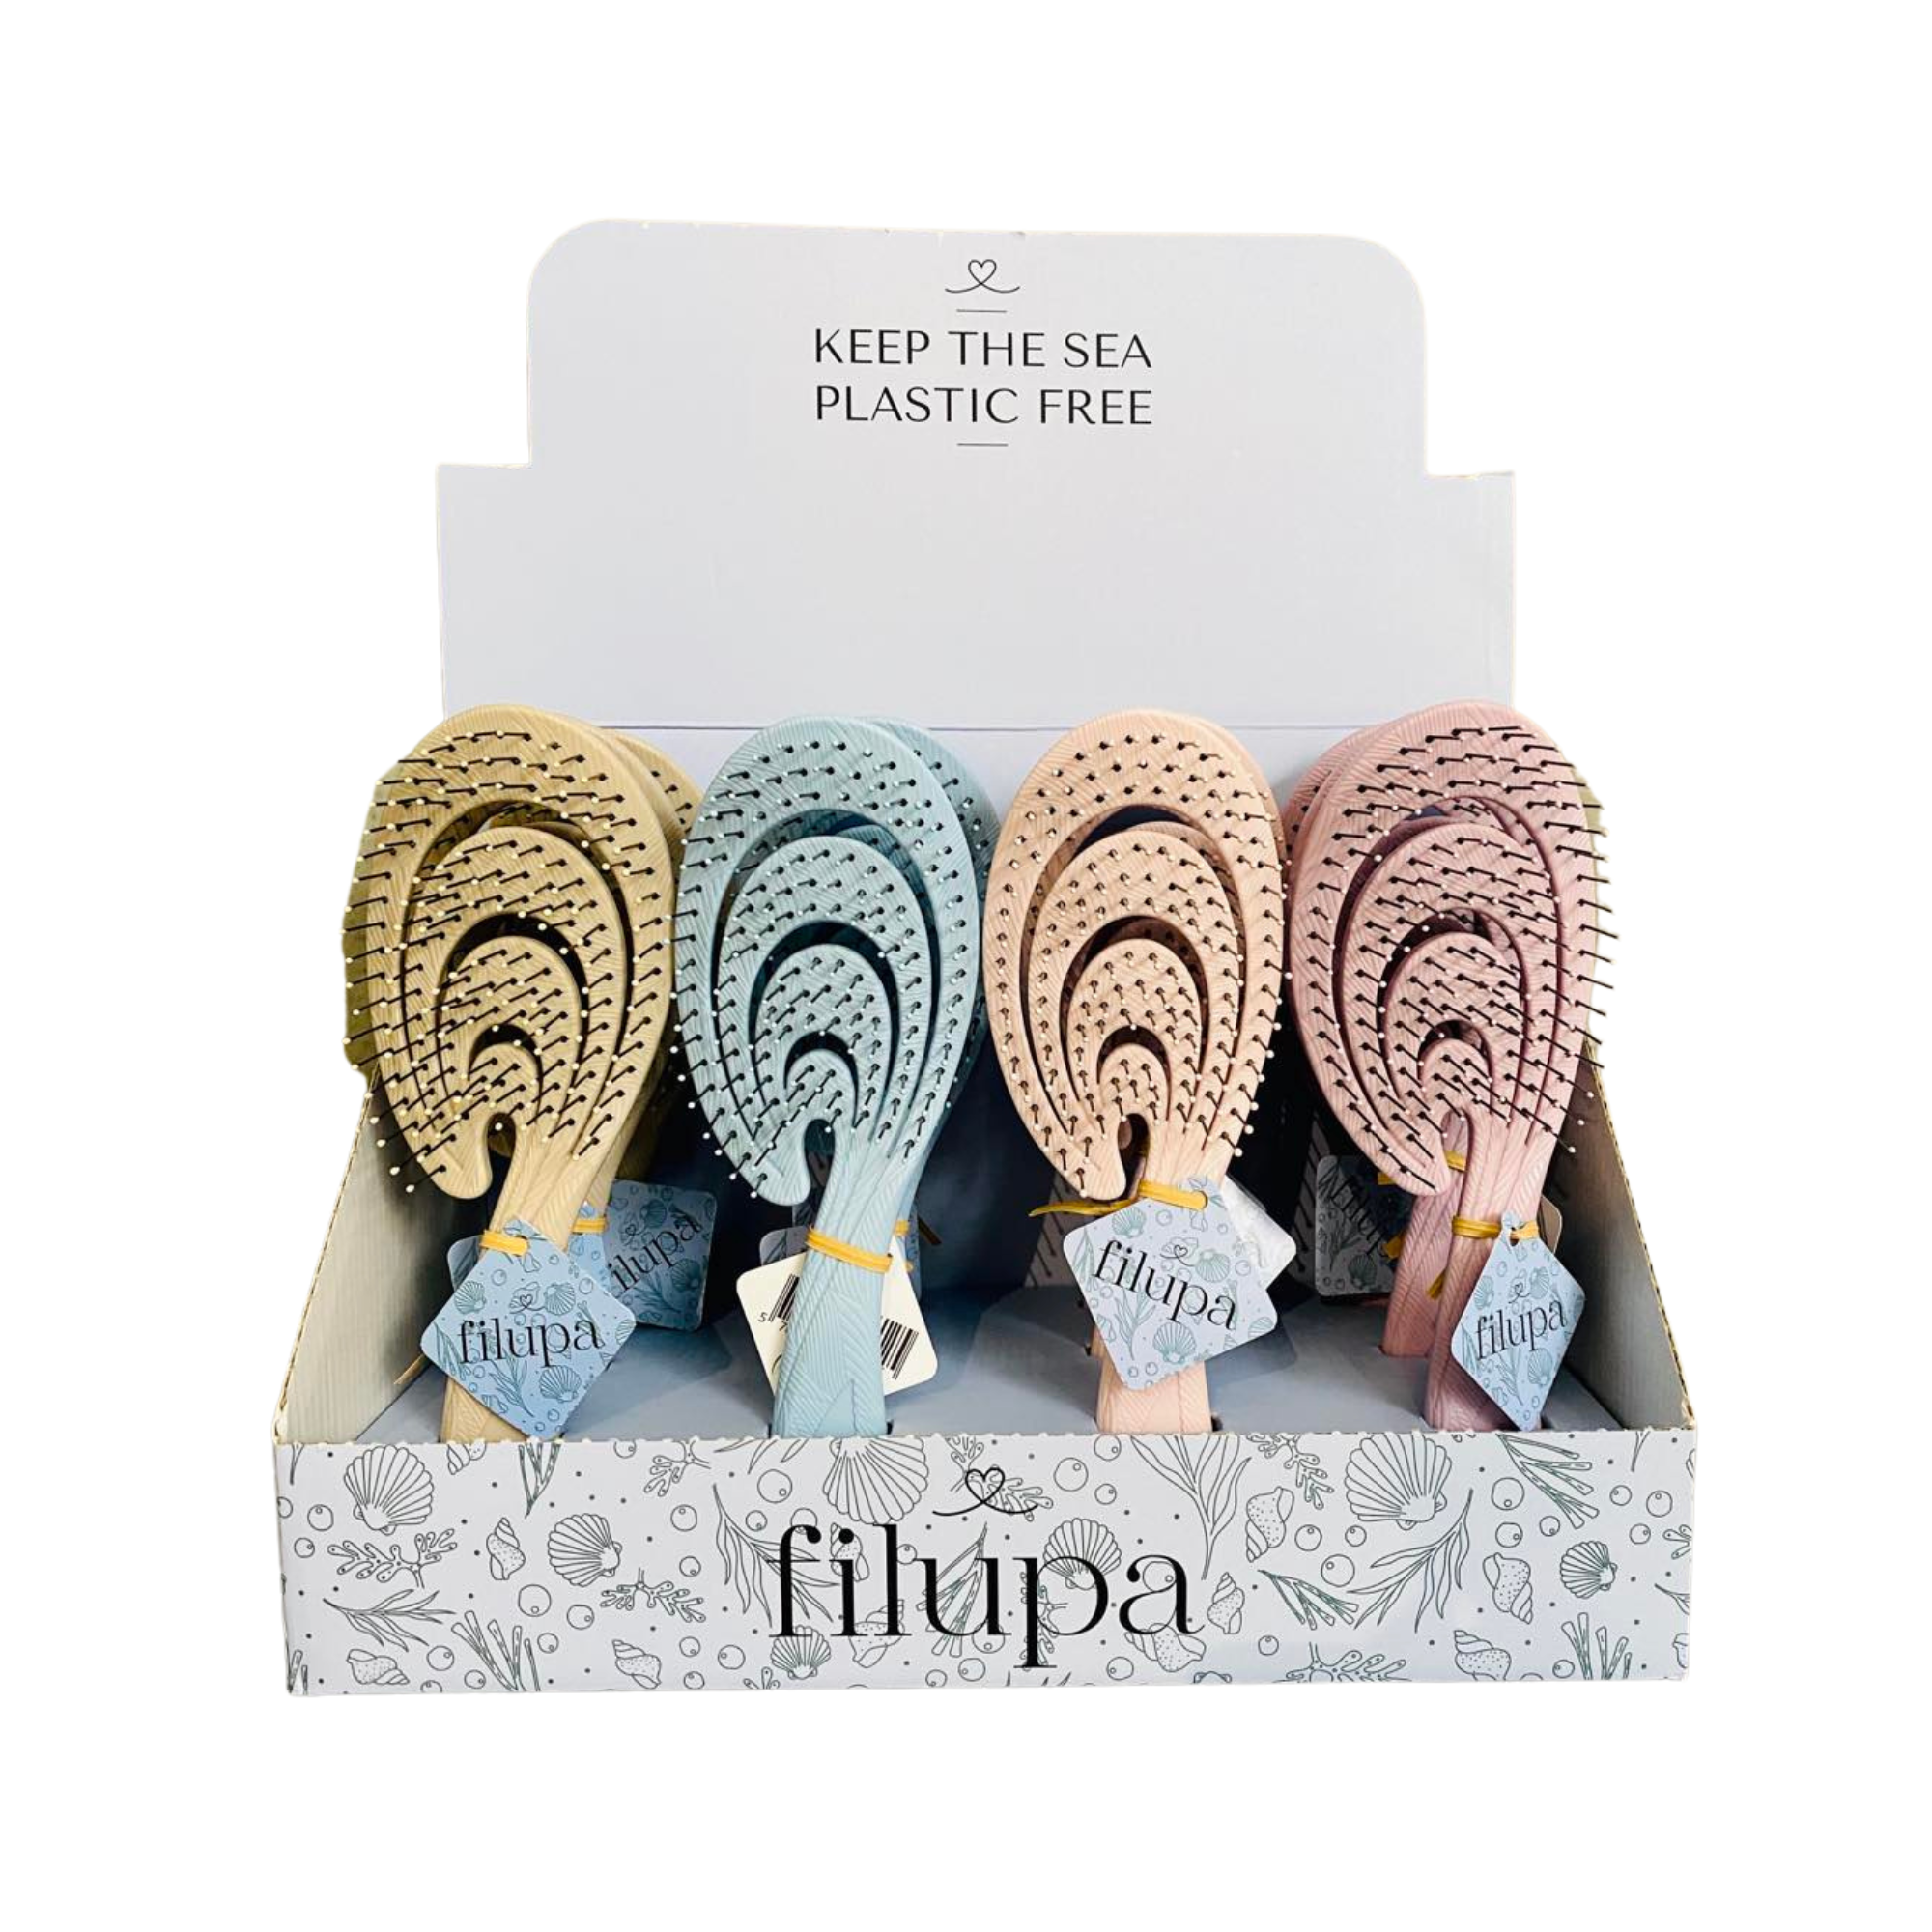 Filupa Brush from Nordic Bio Brush is 100% recyclable. The brush won't pull on your hair and smoothes the finer hair with ease.